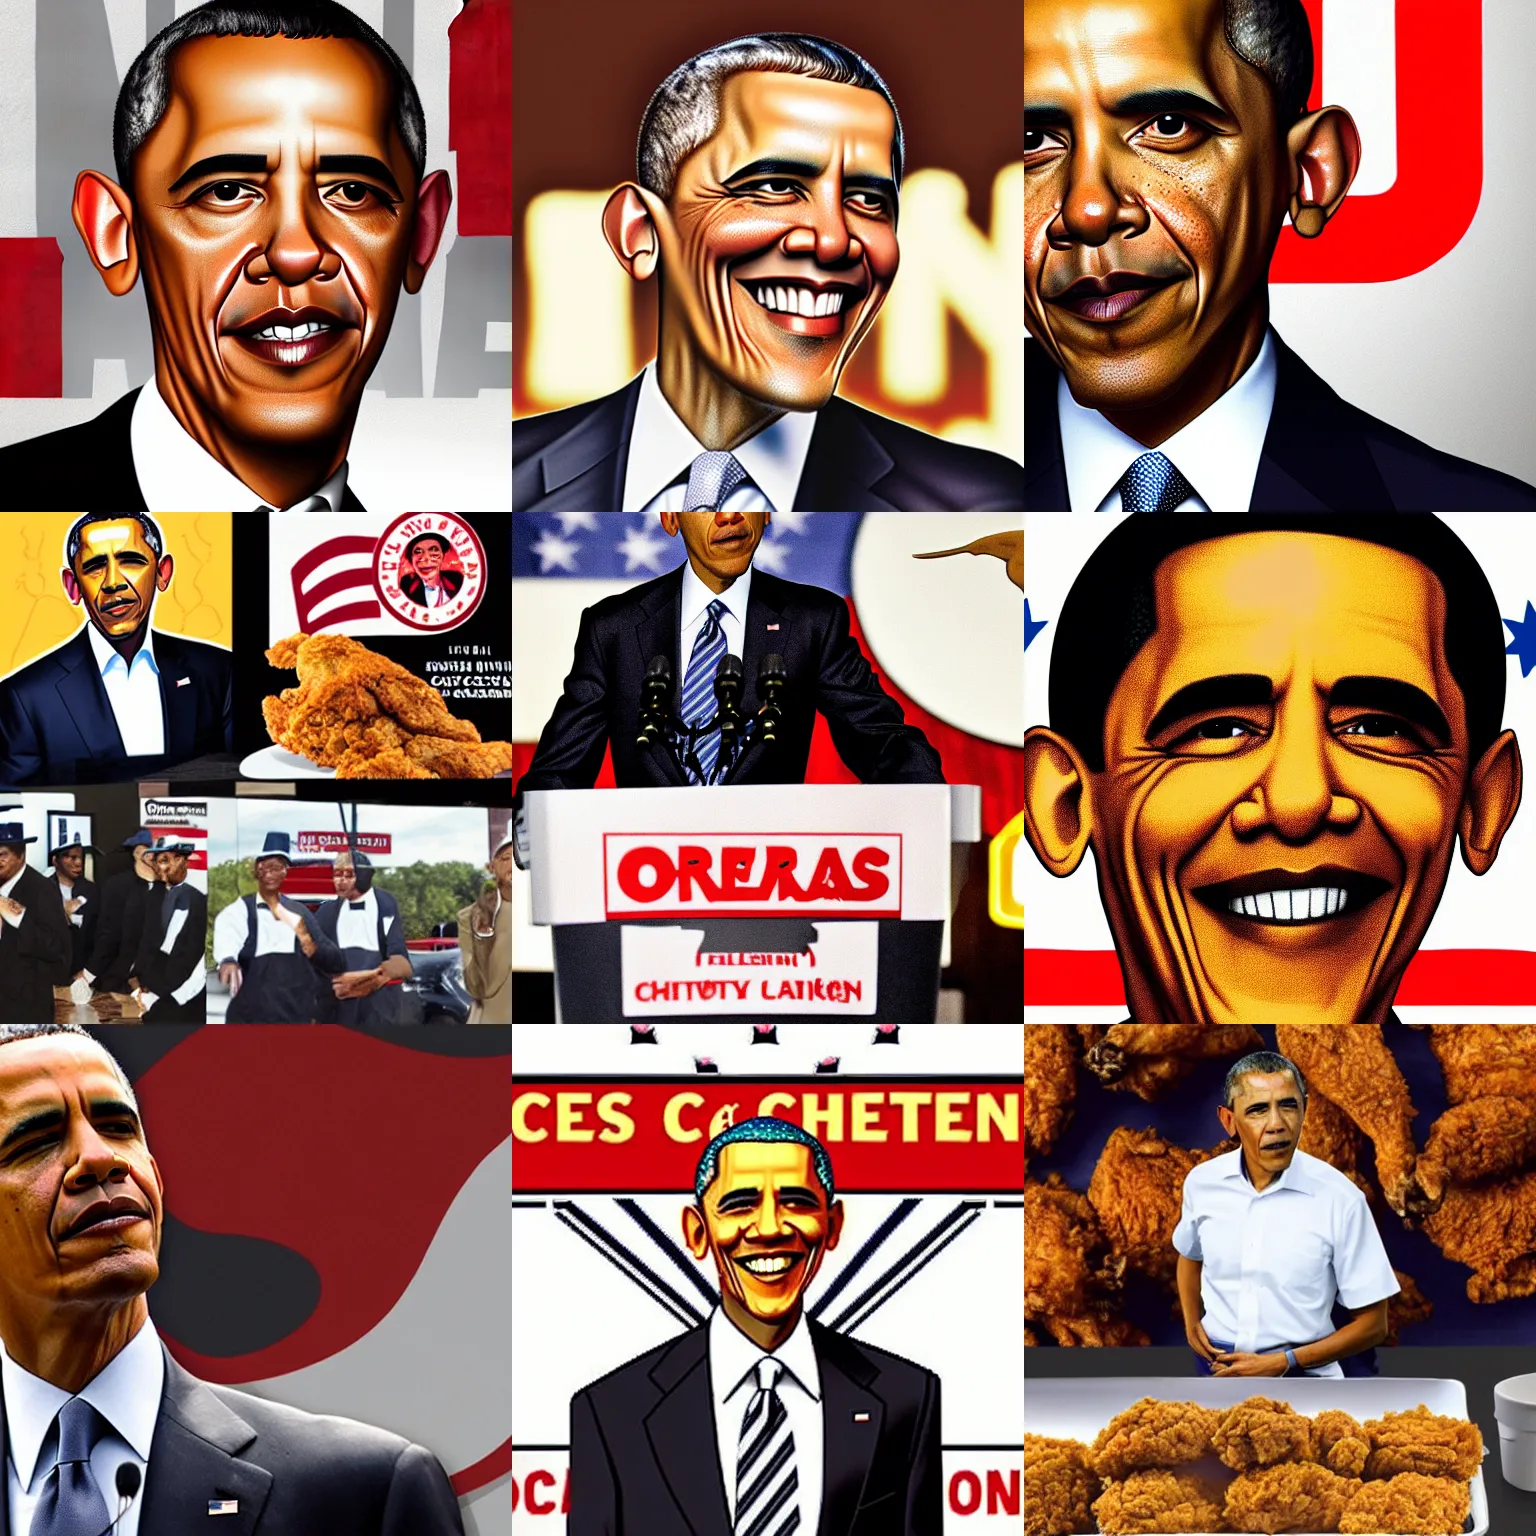 Prompt: obama as waspy caucasian head of a southern fried chicken franchise, colonel of fried chicken, southern planation owner